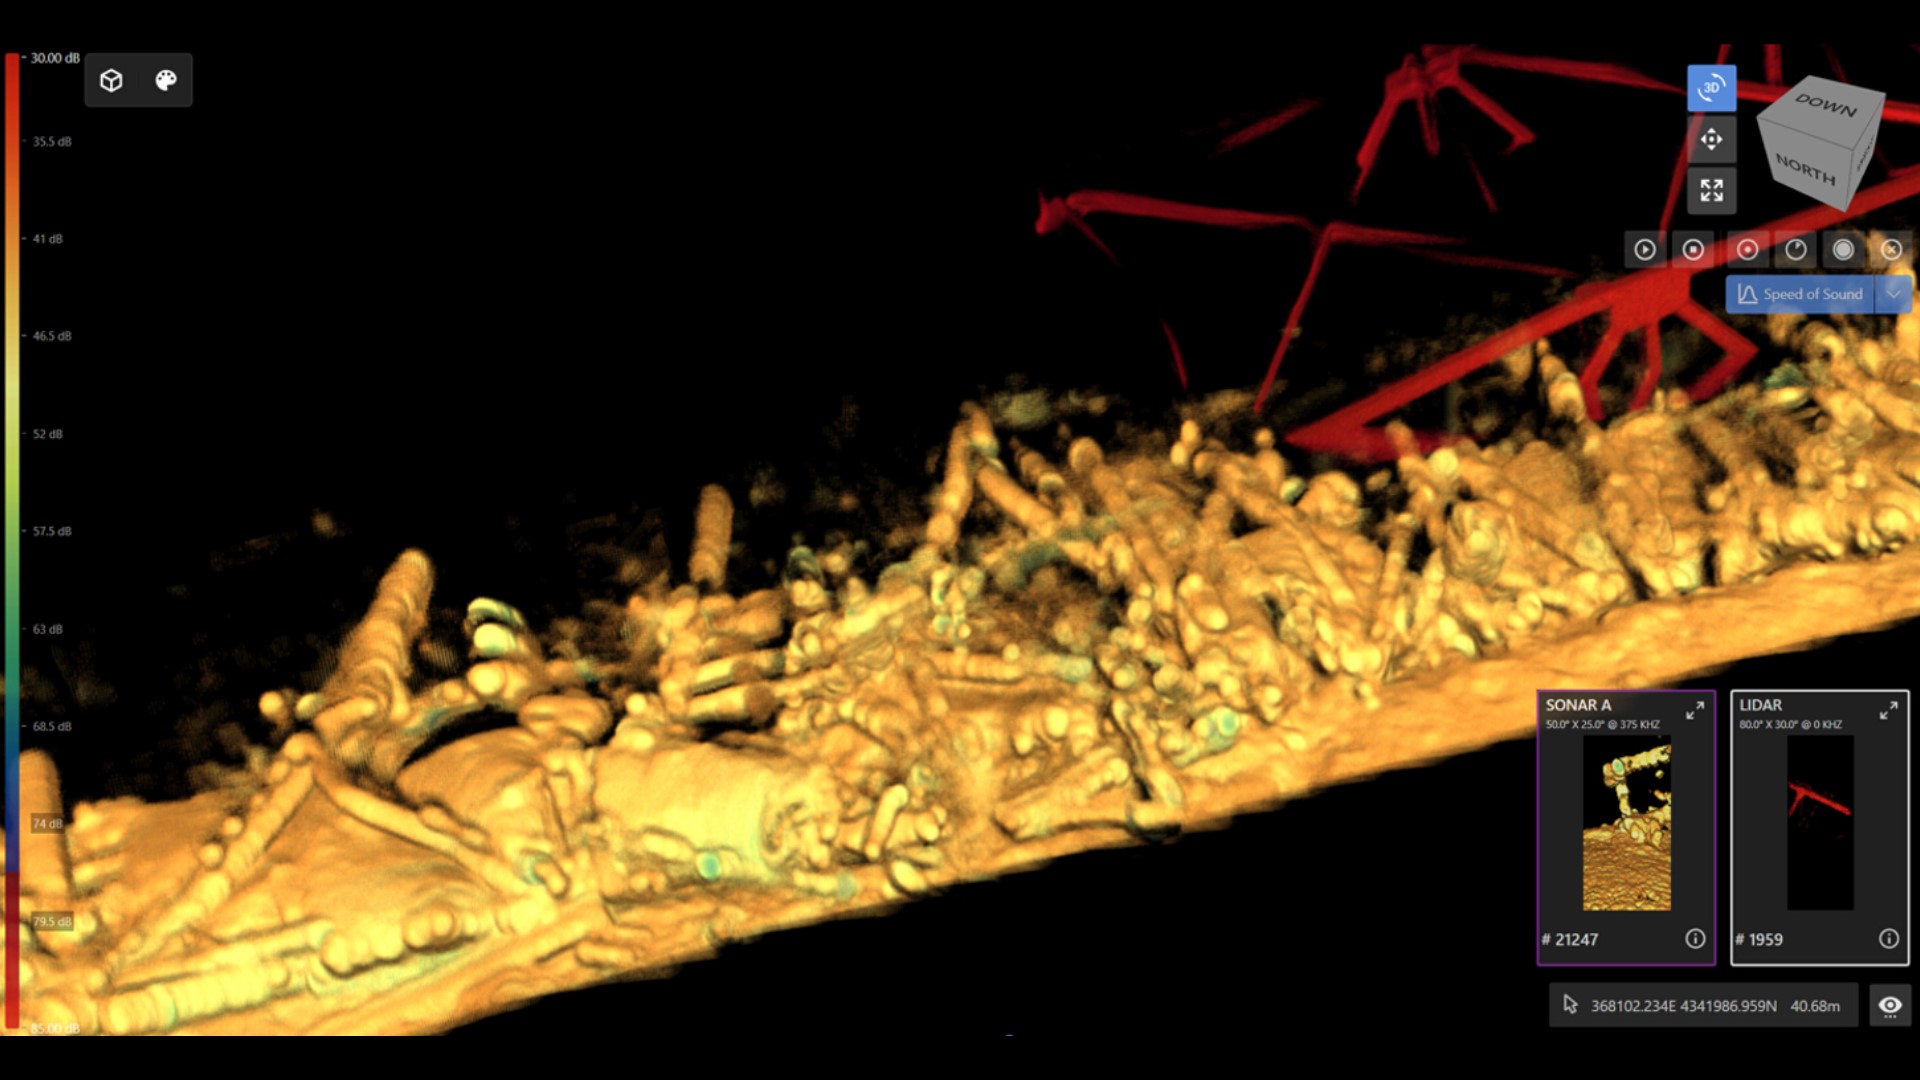 The U.S. Army Corps of Engineers released 3D images of the Francis Scott Key Bridge wreckage sitting at the bottom of the Patapsco River on their Facebook Tuesday.